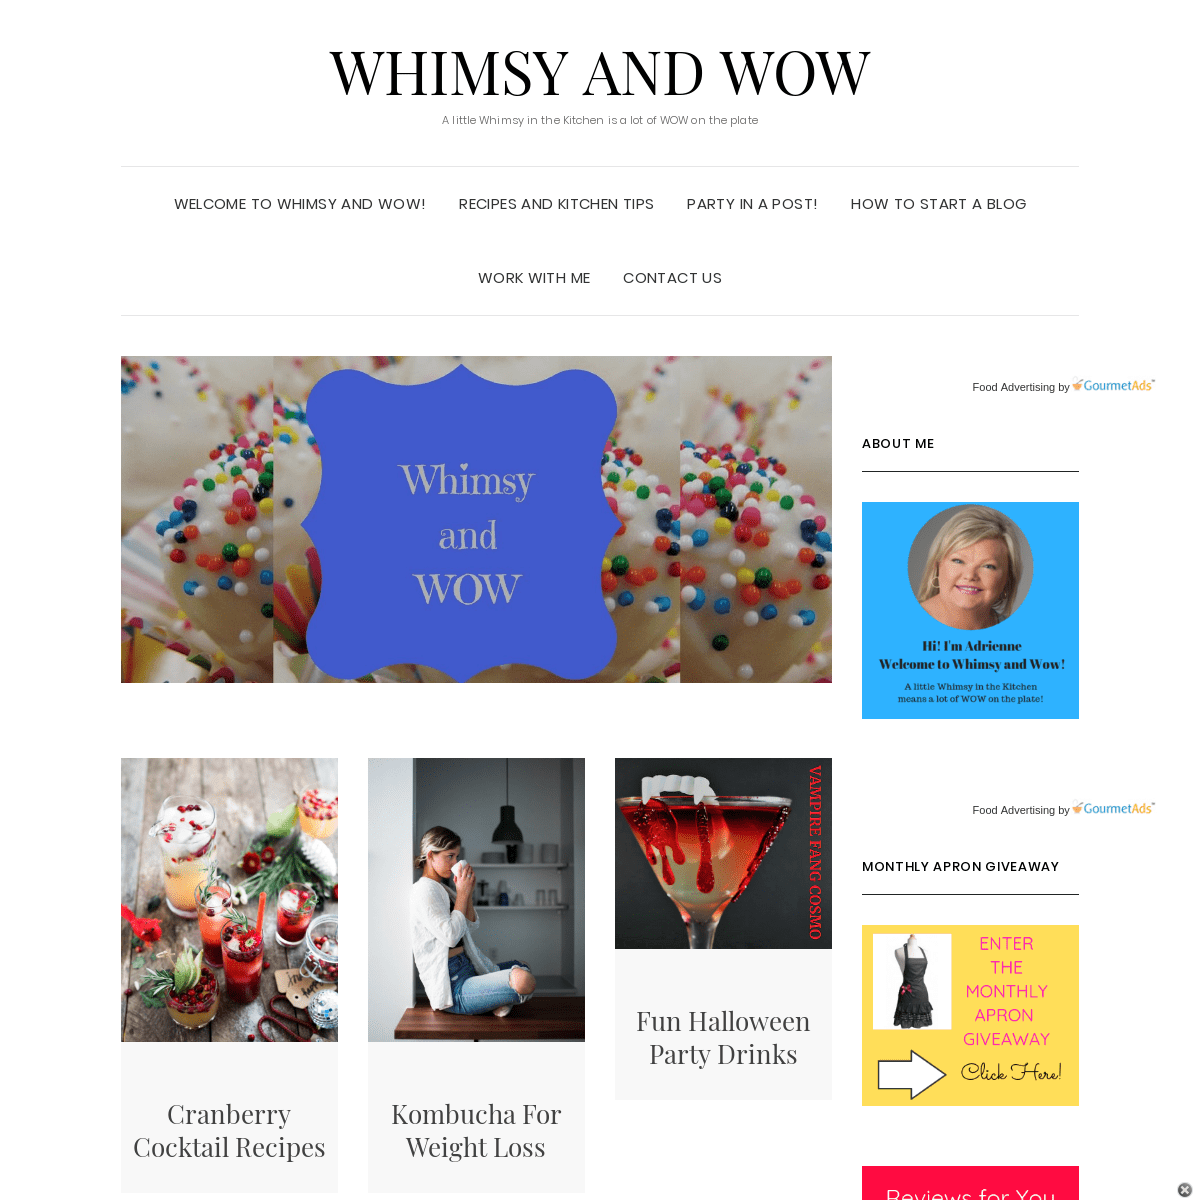 Whimsy and WOW | A little Whimsy in the Kitchen is a lot of WOW on the plate